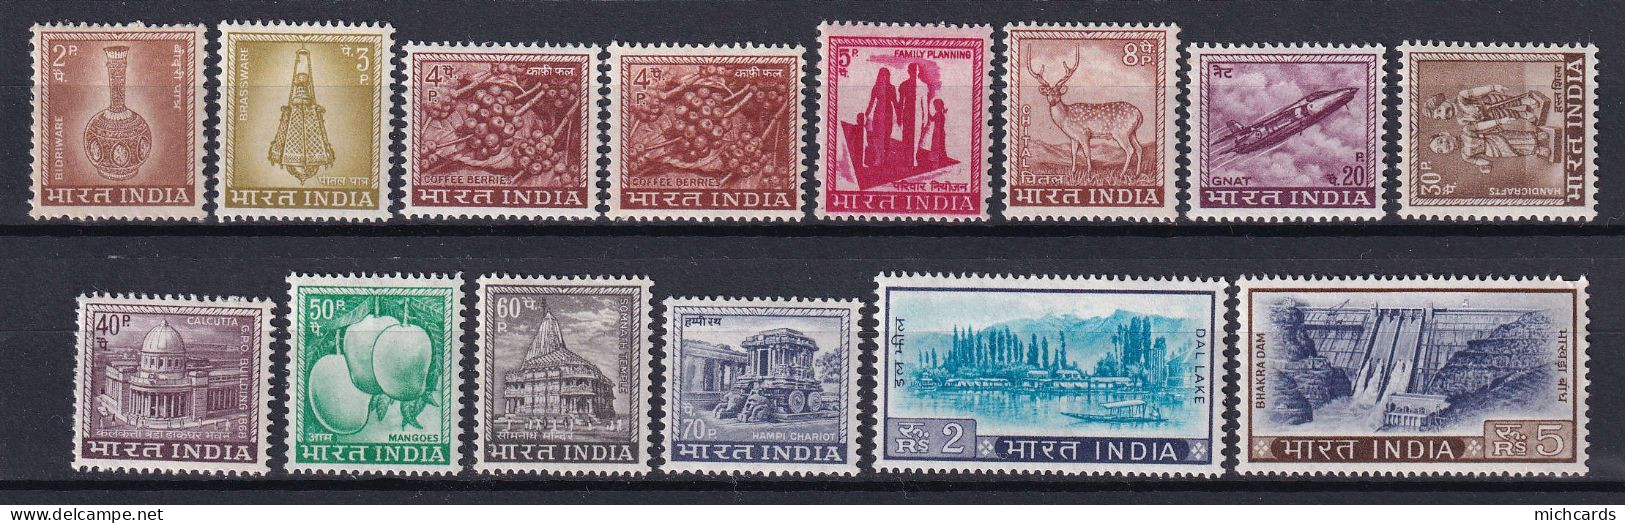 185 INDE 1967/69 - Yvert 222/32 - Serie Courante Definitive - Neuf ** (MNH) Sans Charniere - Nuevos